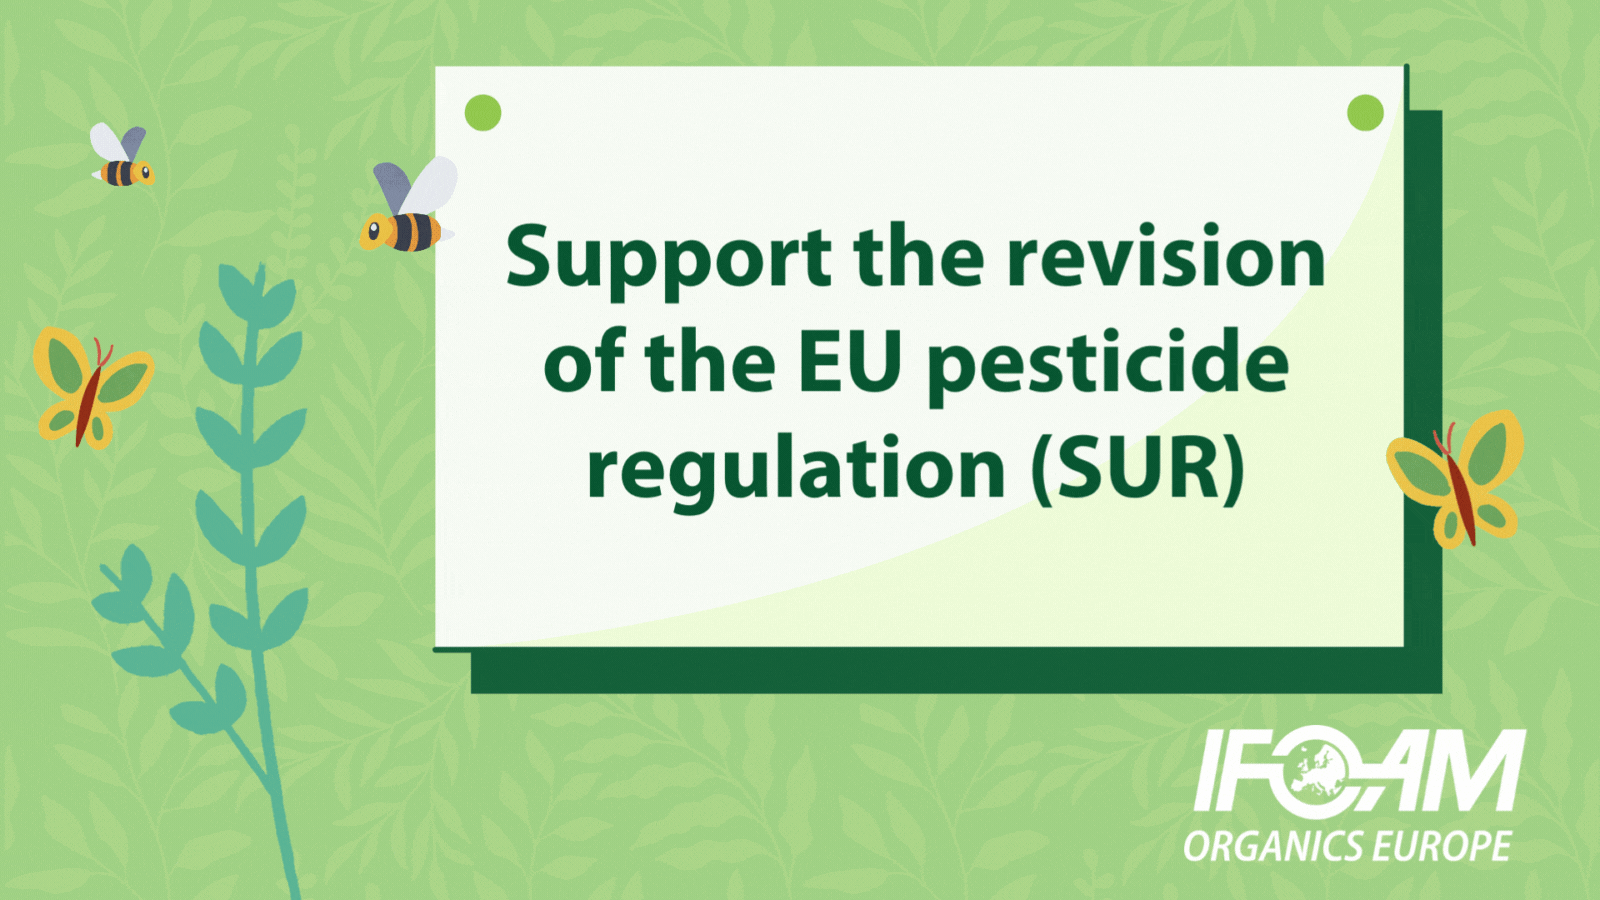 GIF calling for support to revise the EU pesticide regulation